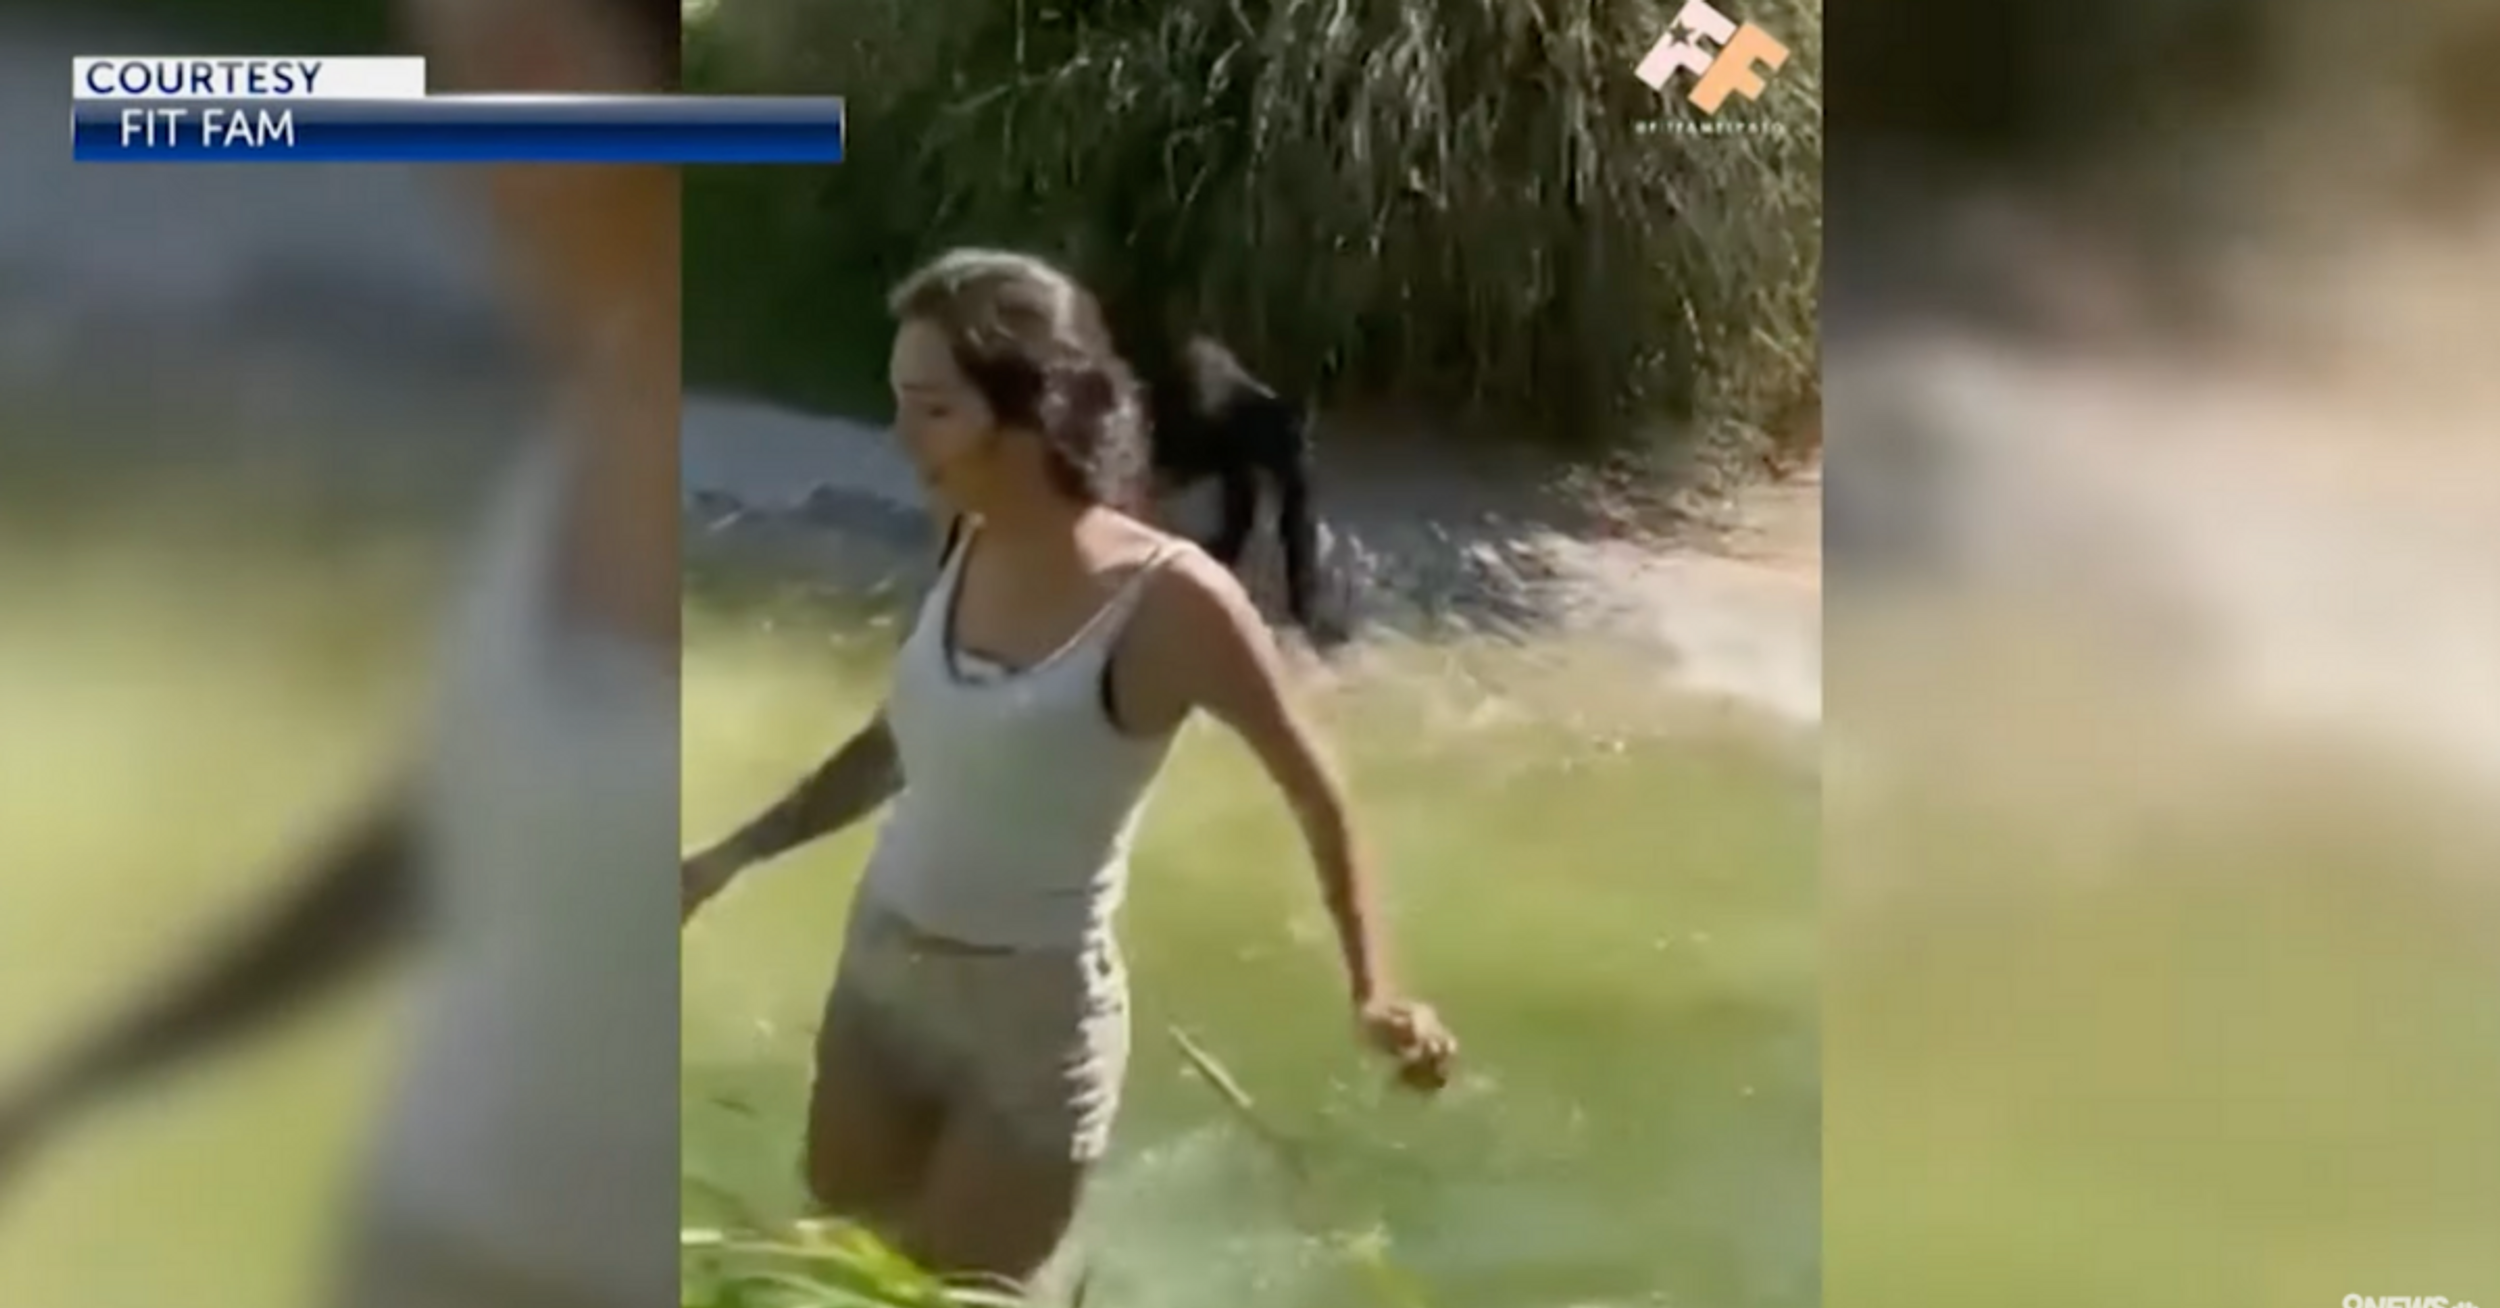 Woman Fired From Job And Facing Charges After Climbing Into Texas Zoo's Monkey Enclosure